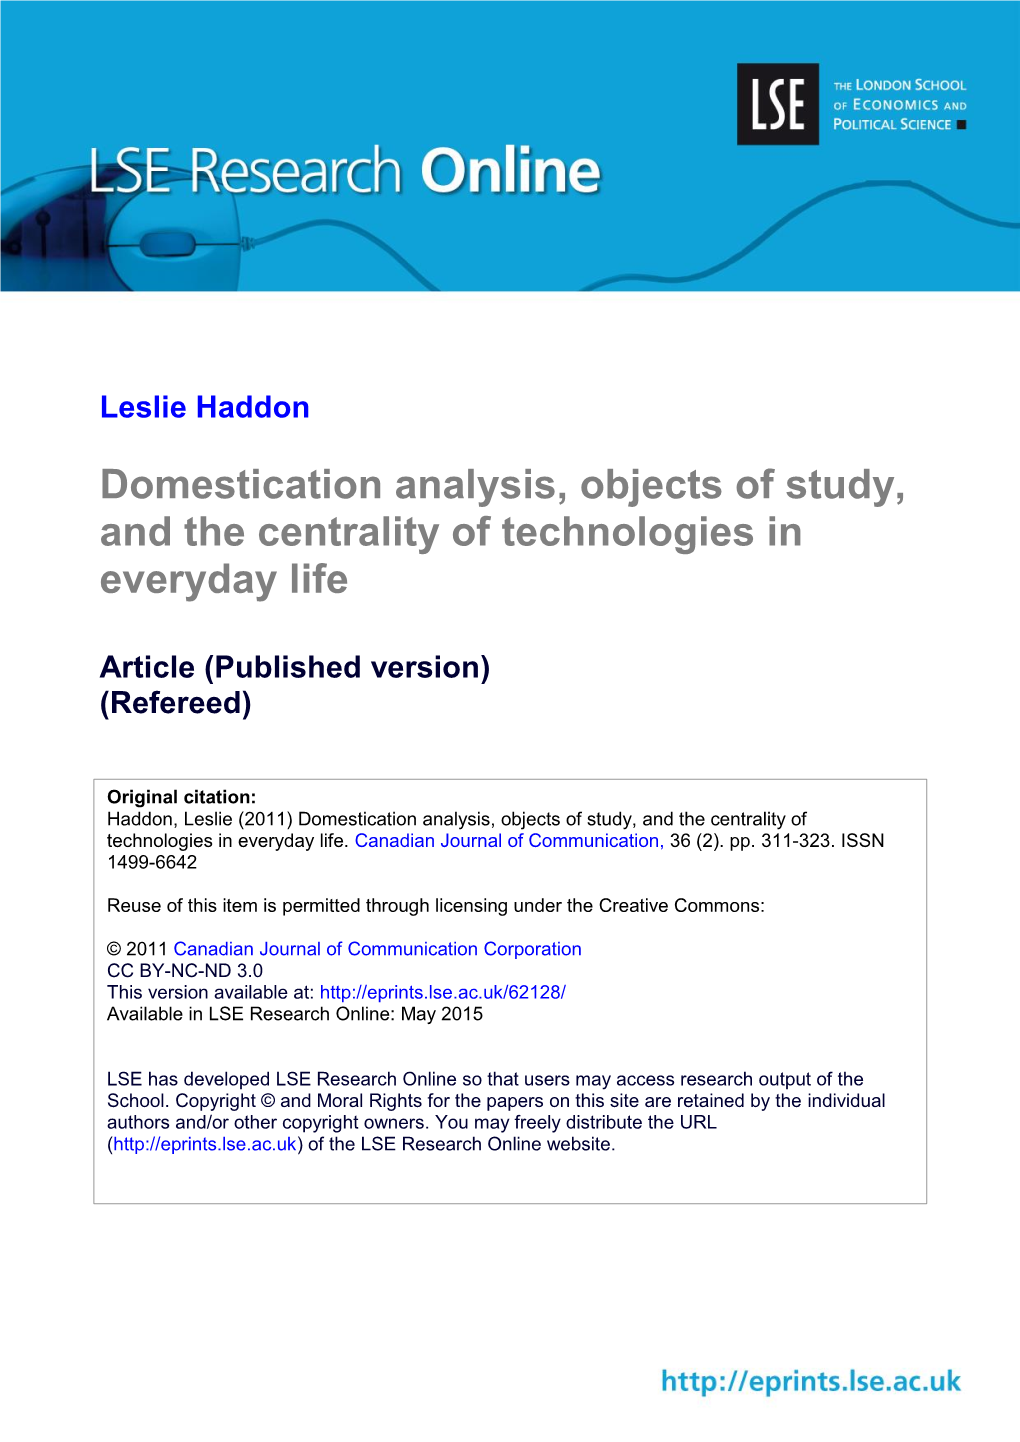 Domestication Analysis, Objects of Study, and the Centrality of Technologies in Everyday Life